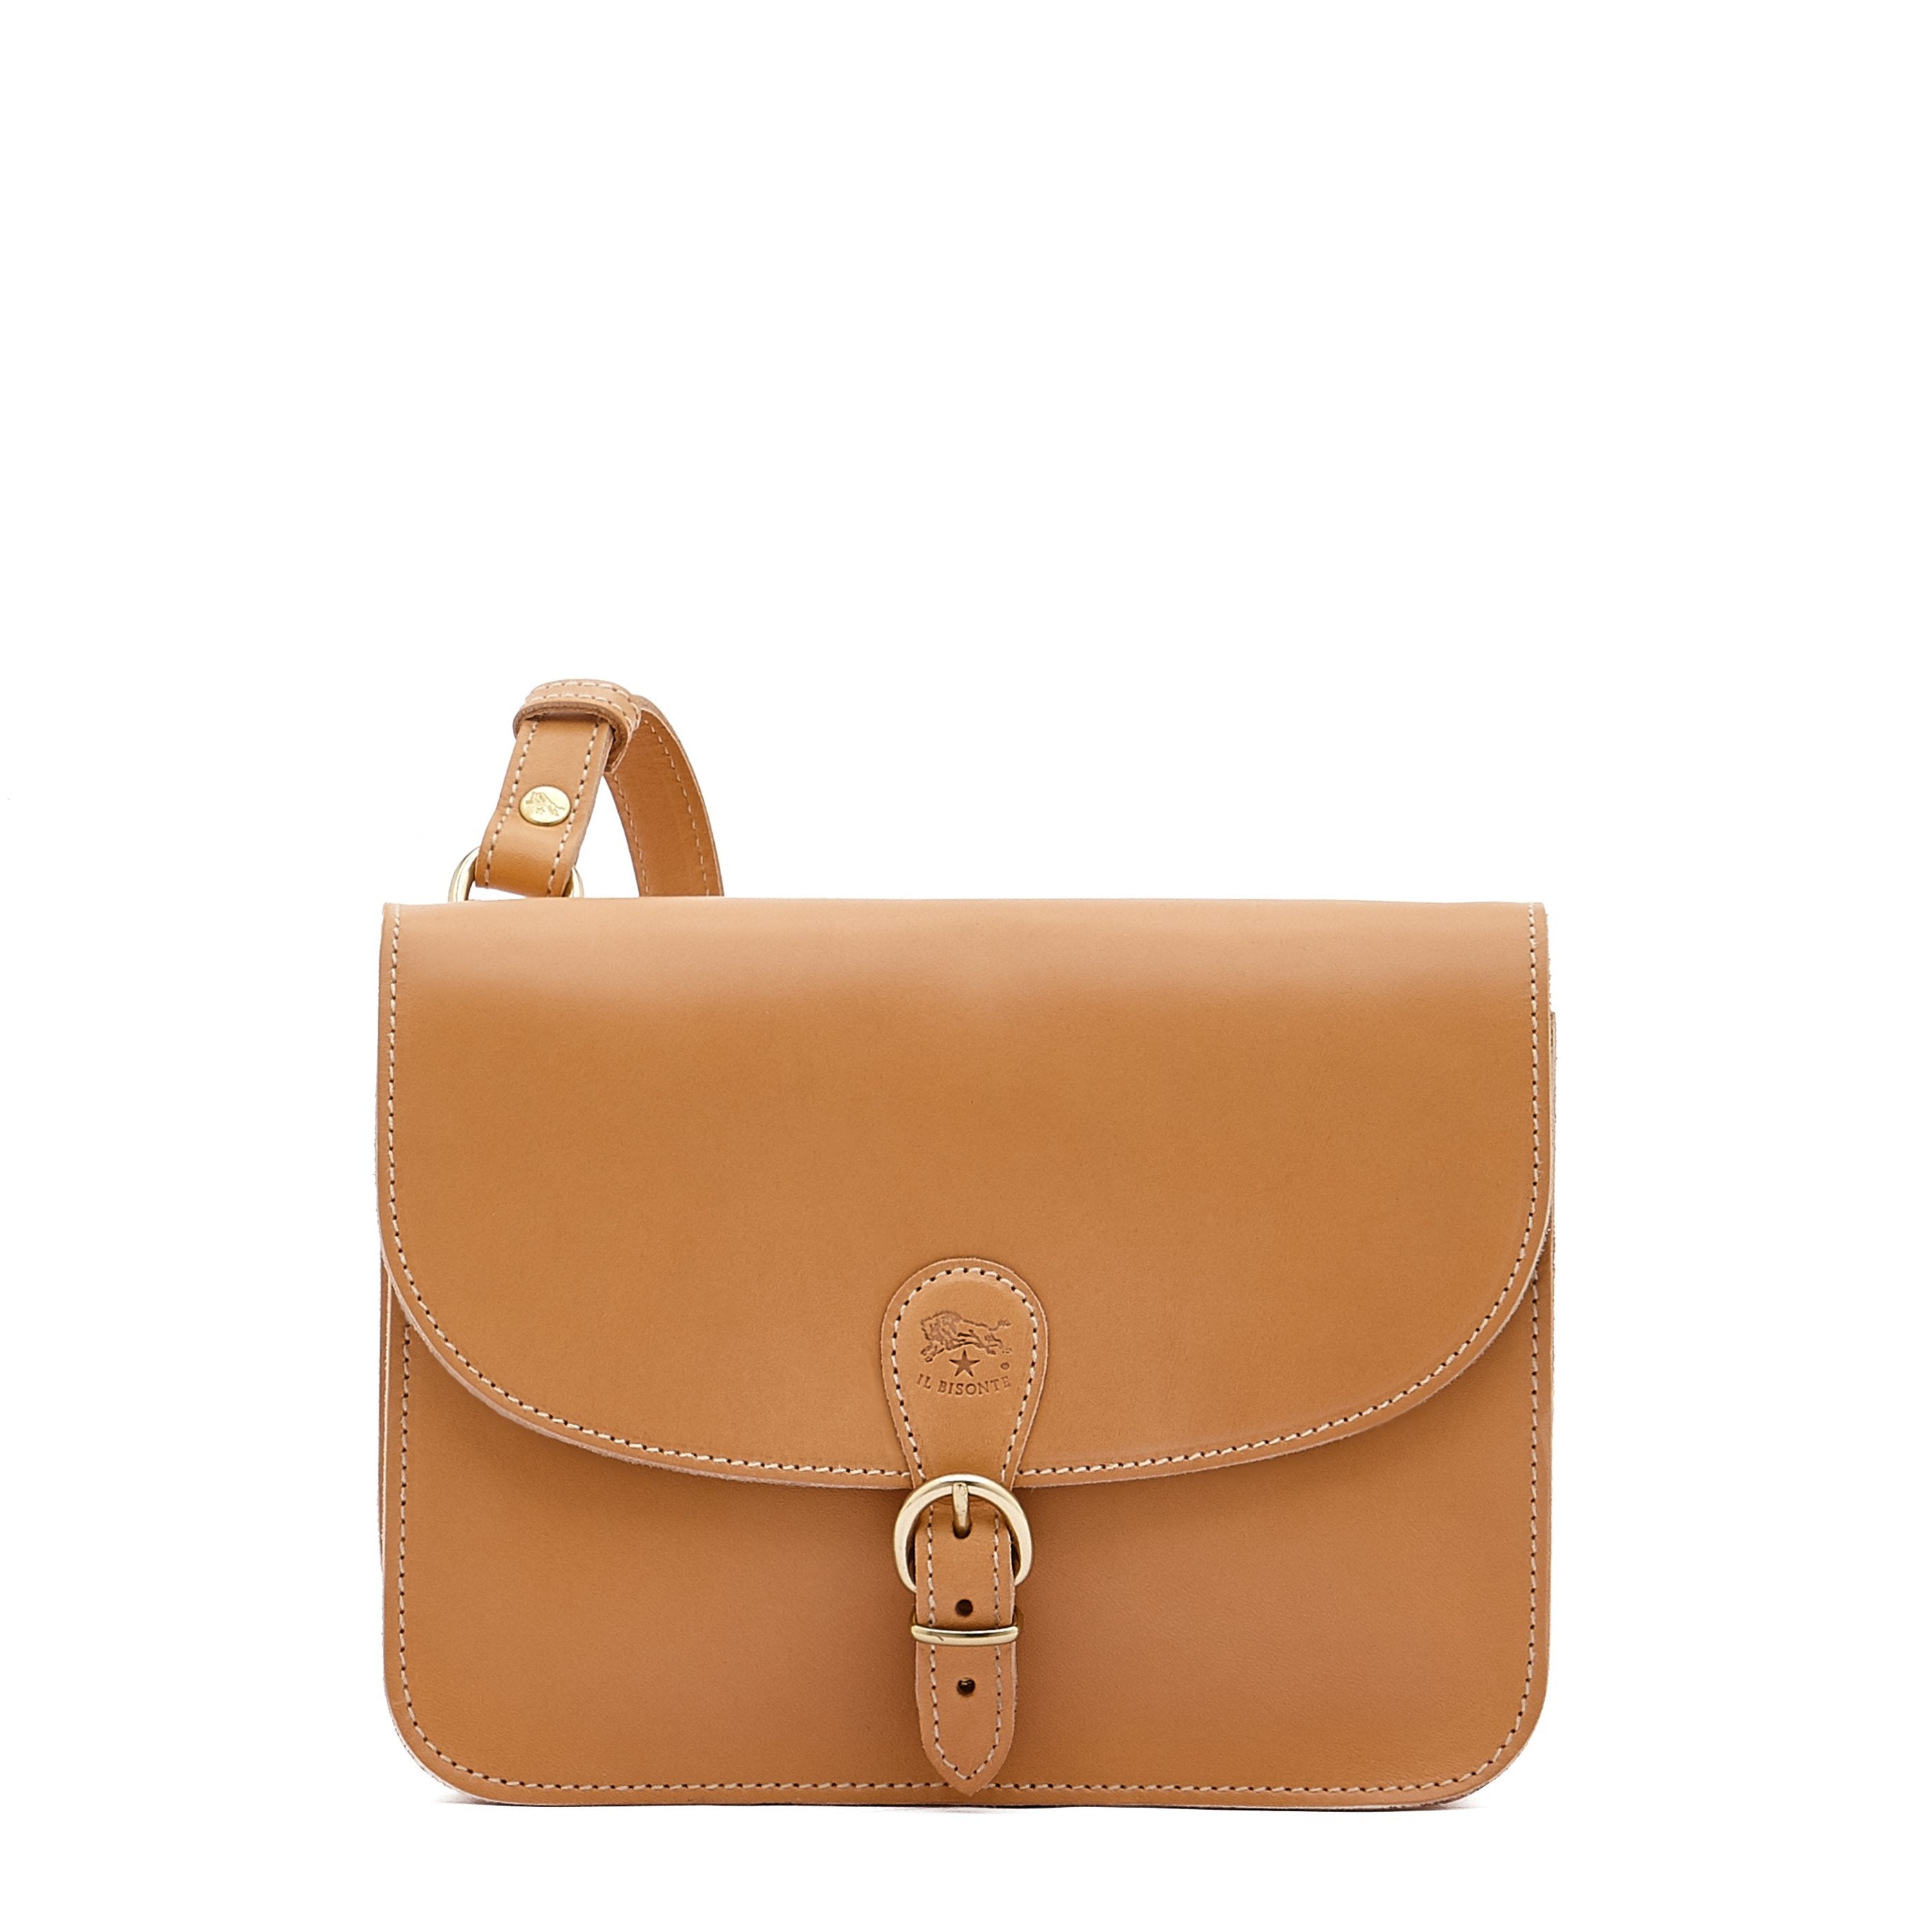 Chloé Faye Large Leather Day Bag